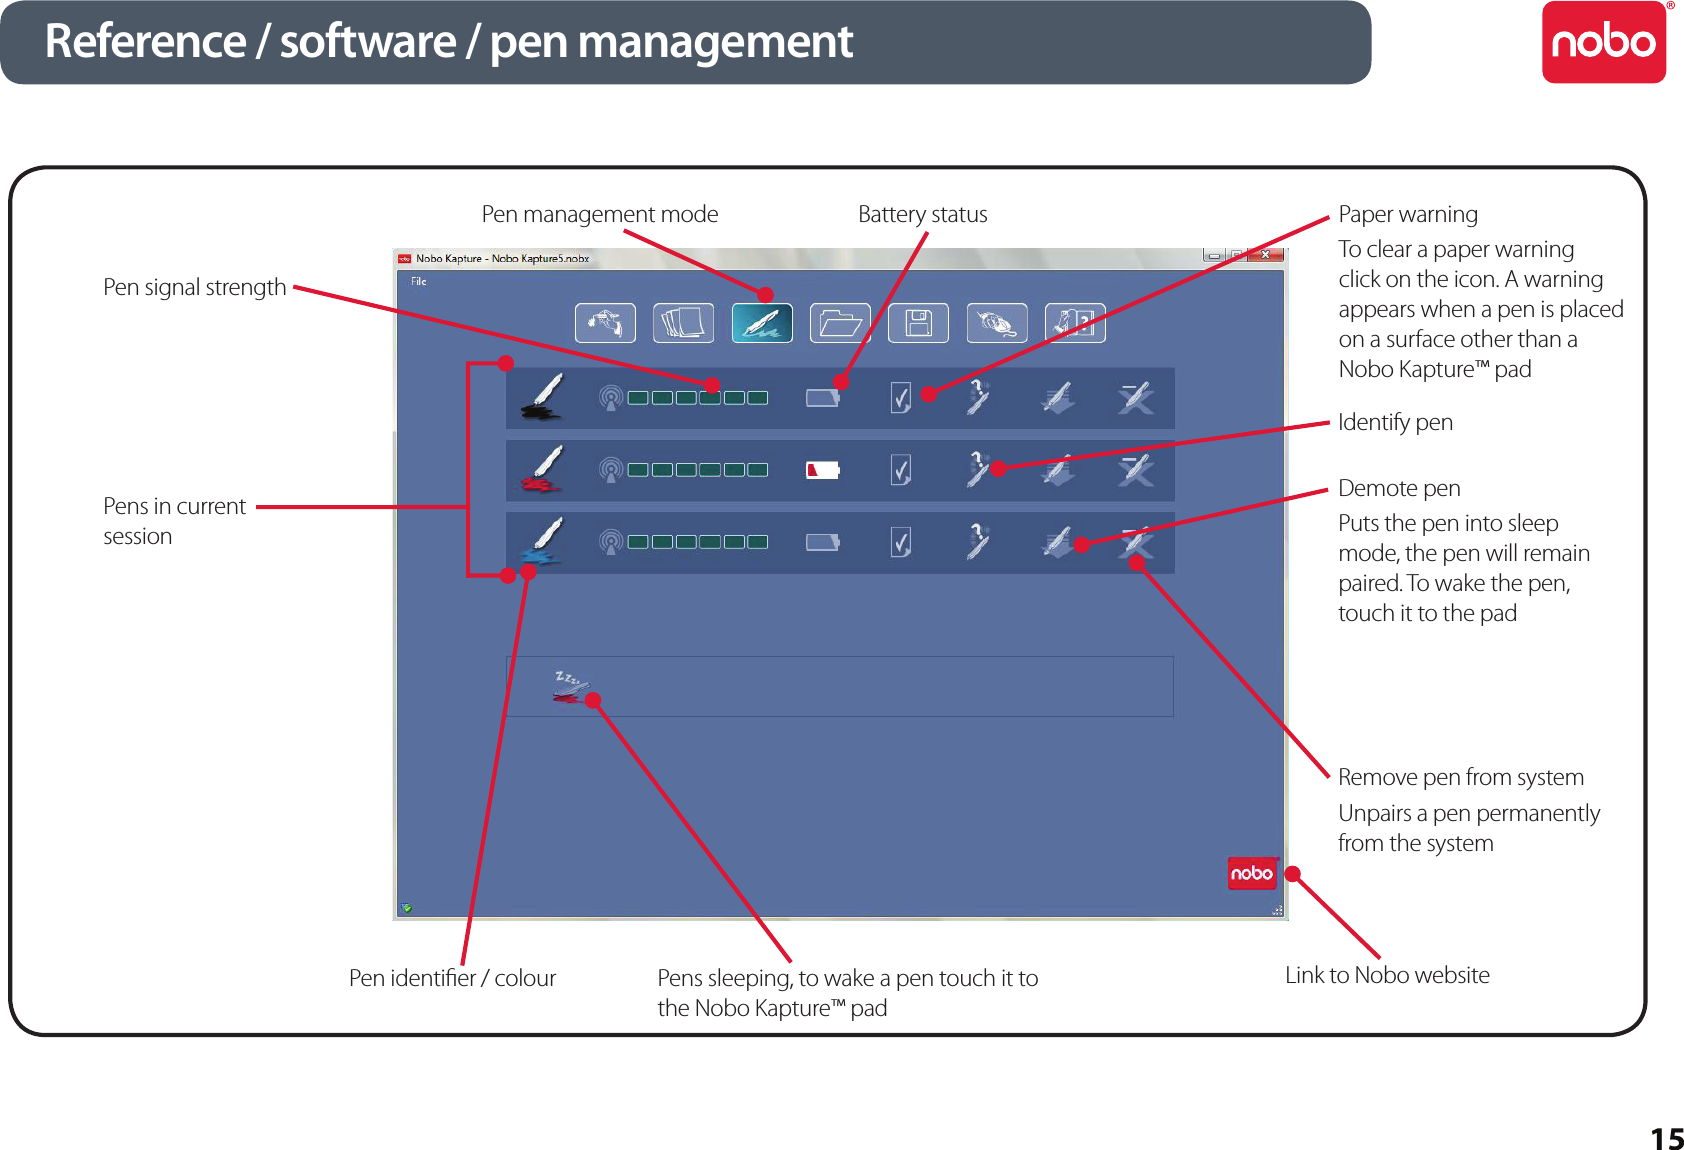 15Reference / software / pen managementPen identier / colour Pens sleeping, to wake a pen touch it to the Nobo Kapture™ padLink to Nobo websitePens in current sessionPen signal strengthPen management mode Battery status Paper warningTo clear a paper warning click on the icon. A warning appears when a pen is placed on a surface other than a Nobo Kapture™ padIdentify penDemote penPuts the pen into sleep mode, the pen will remain paired. To wake the pen, touch it to the padRemove pen from systemUnpairs a pen permanently from the system